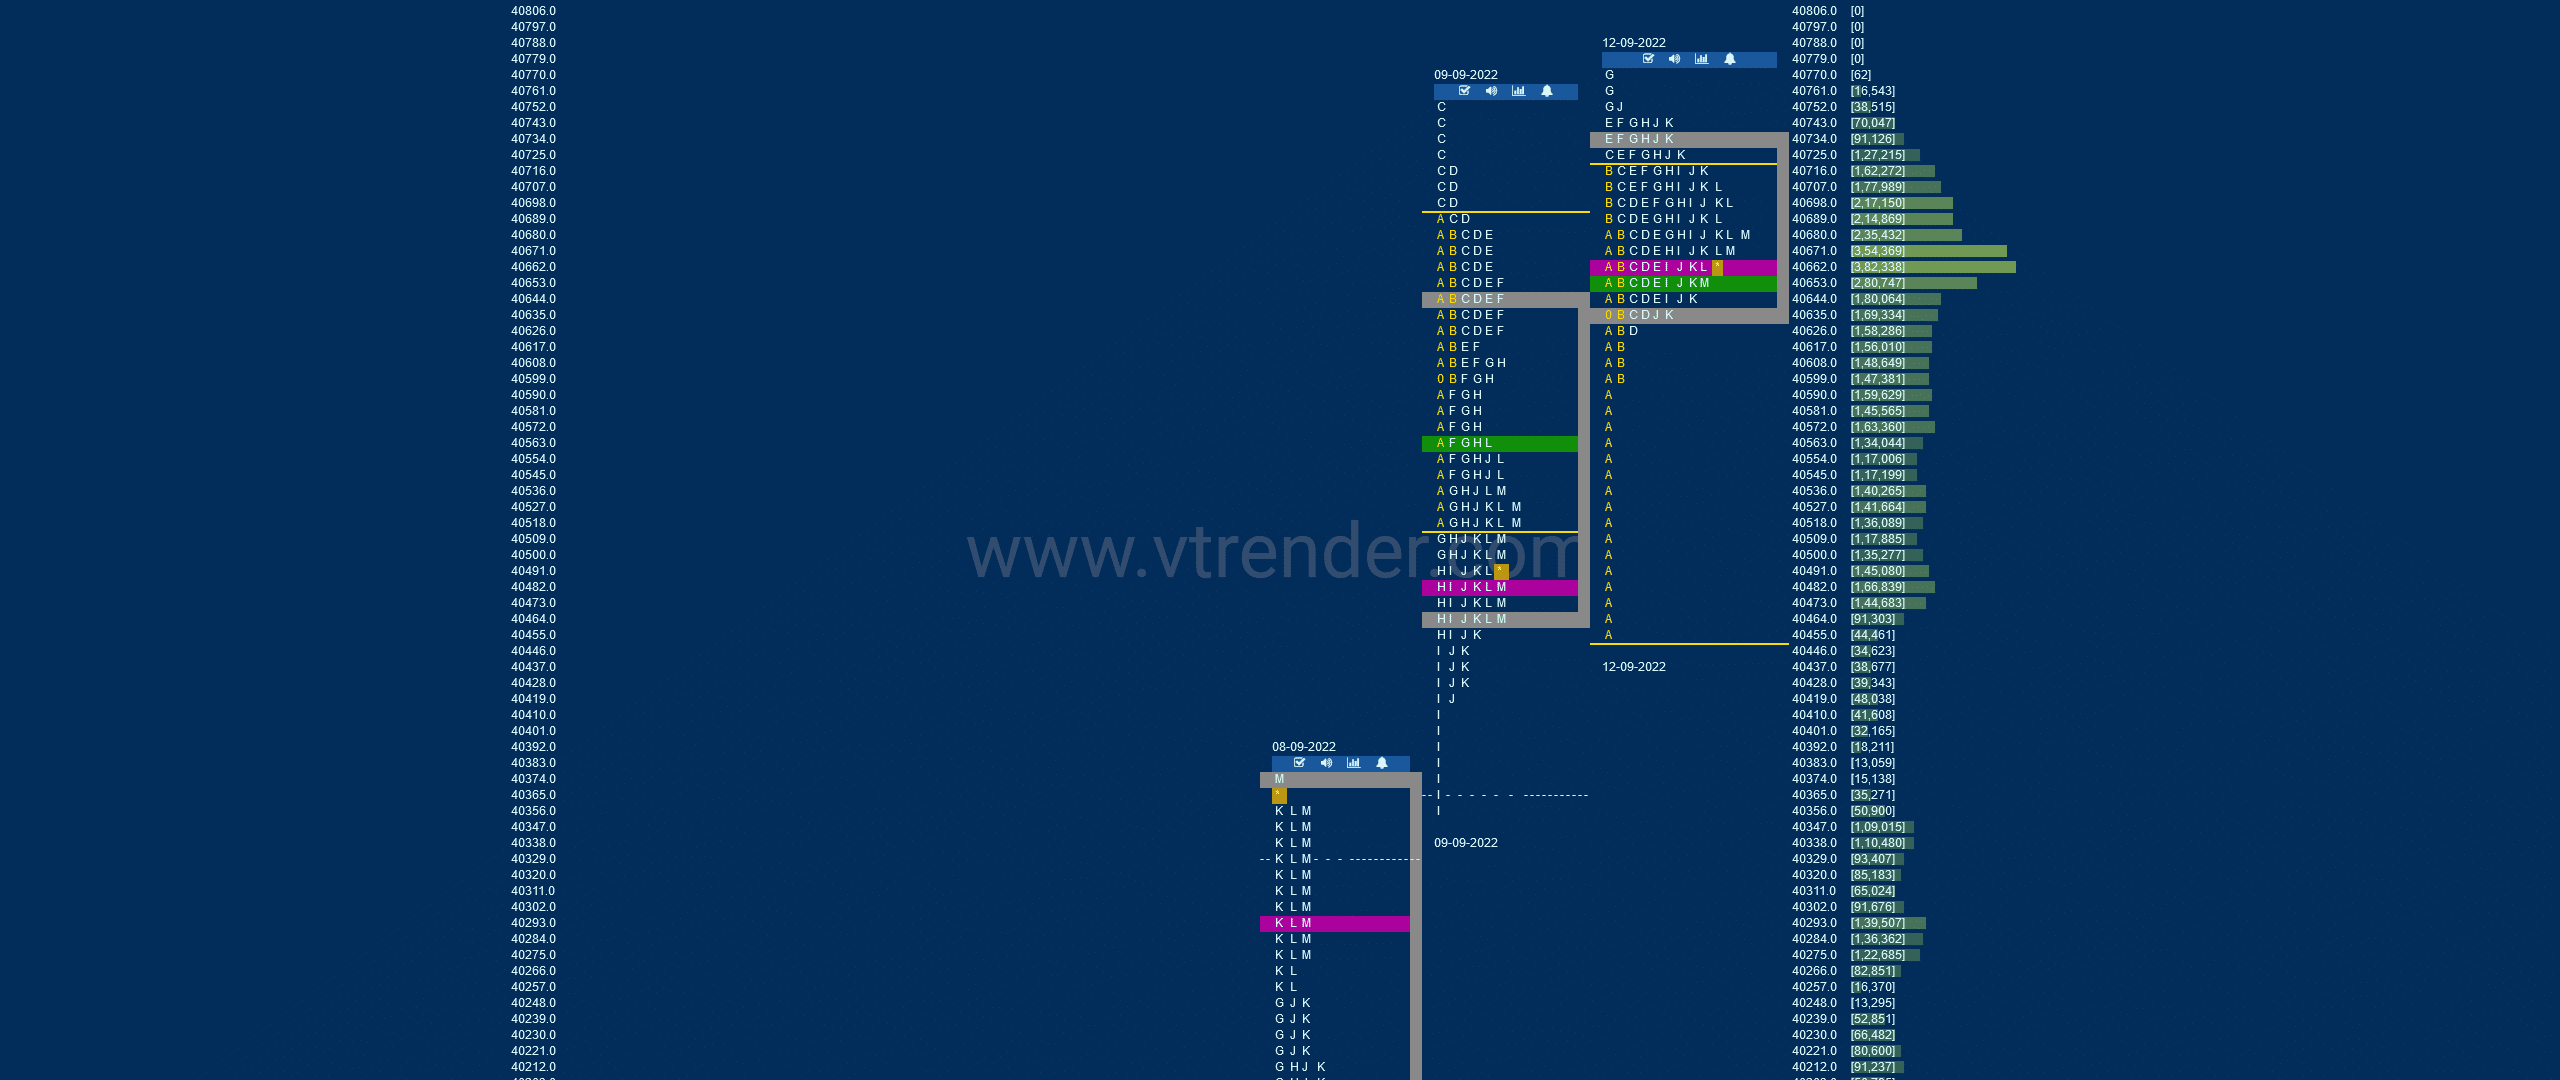 Bnf 7 Market Profile Analysis Dated 12Th Sep 2022 Banknifty Futures, Charts, Day Trading, Intraday Trading, Intraday Trading Strategies, Market Profile, Market Profile Trading Strategies, Nifty Futures, Order Flow Analysis, Support And Resistance, Technical Analysis, Trading Strategies, Volume Profile Trading